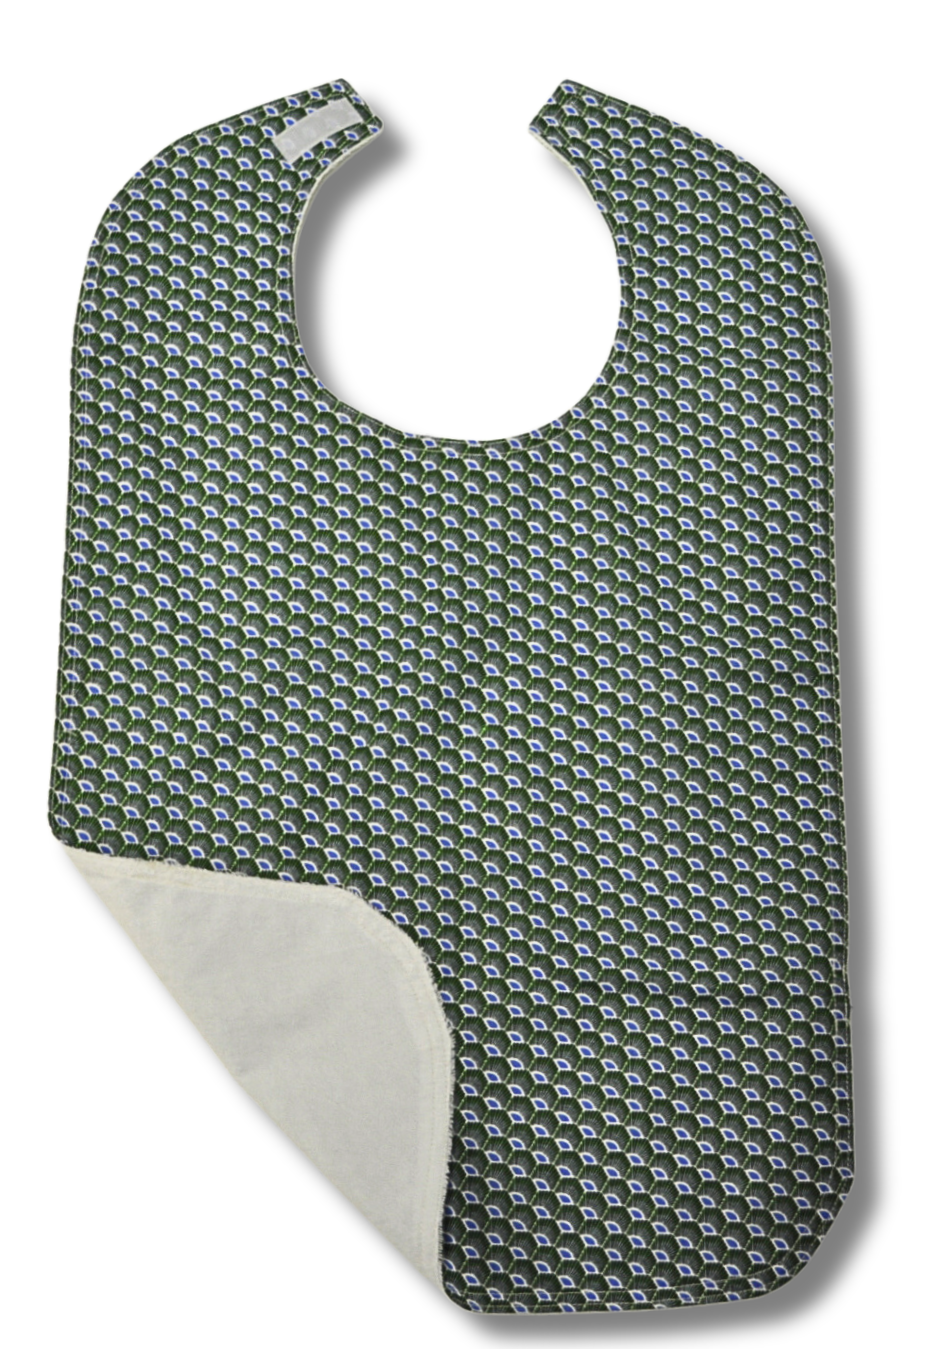 Bibs for Men & Women, Highly Absorbent Breathable Washable and Reusable- Peacock